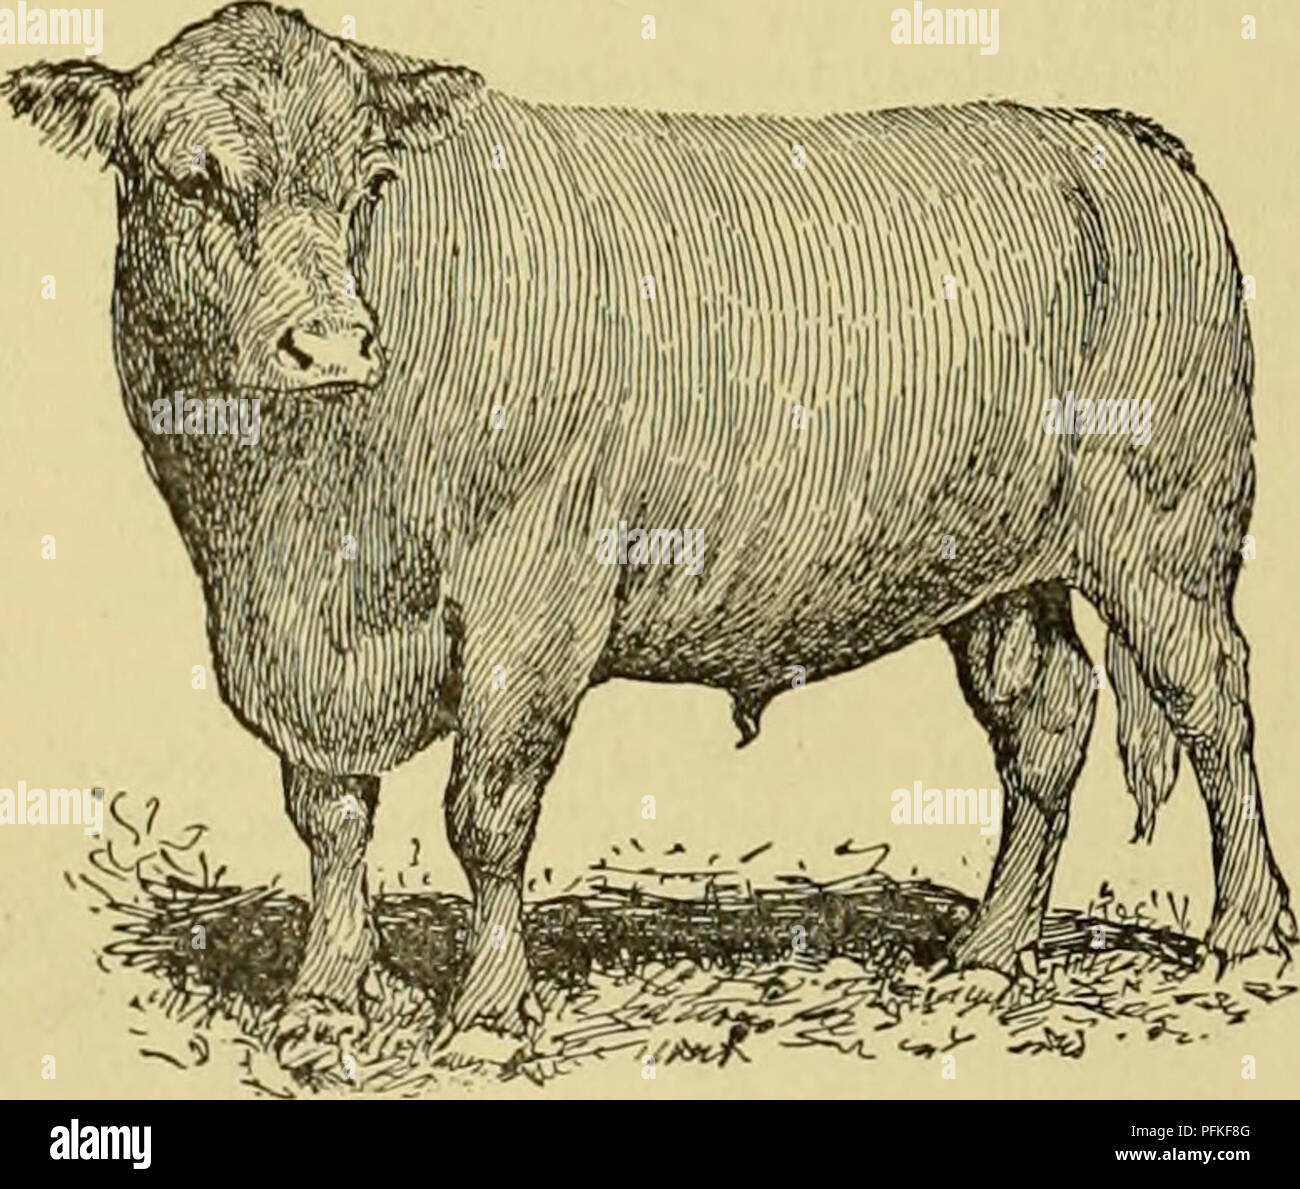 Cyclopedia of farm animals. Domestic animals; Animal products. 368 CATTLE  CATTLE Scale of Points for Red Polled Cattle, continued For bulls Perfect  score 10. Legs.—Short, straight, squarely placed, medium bone 3